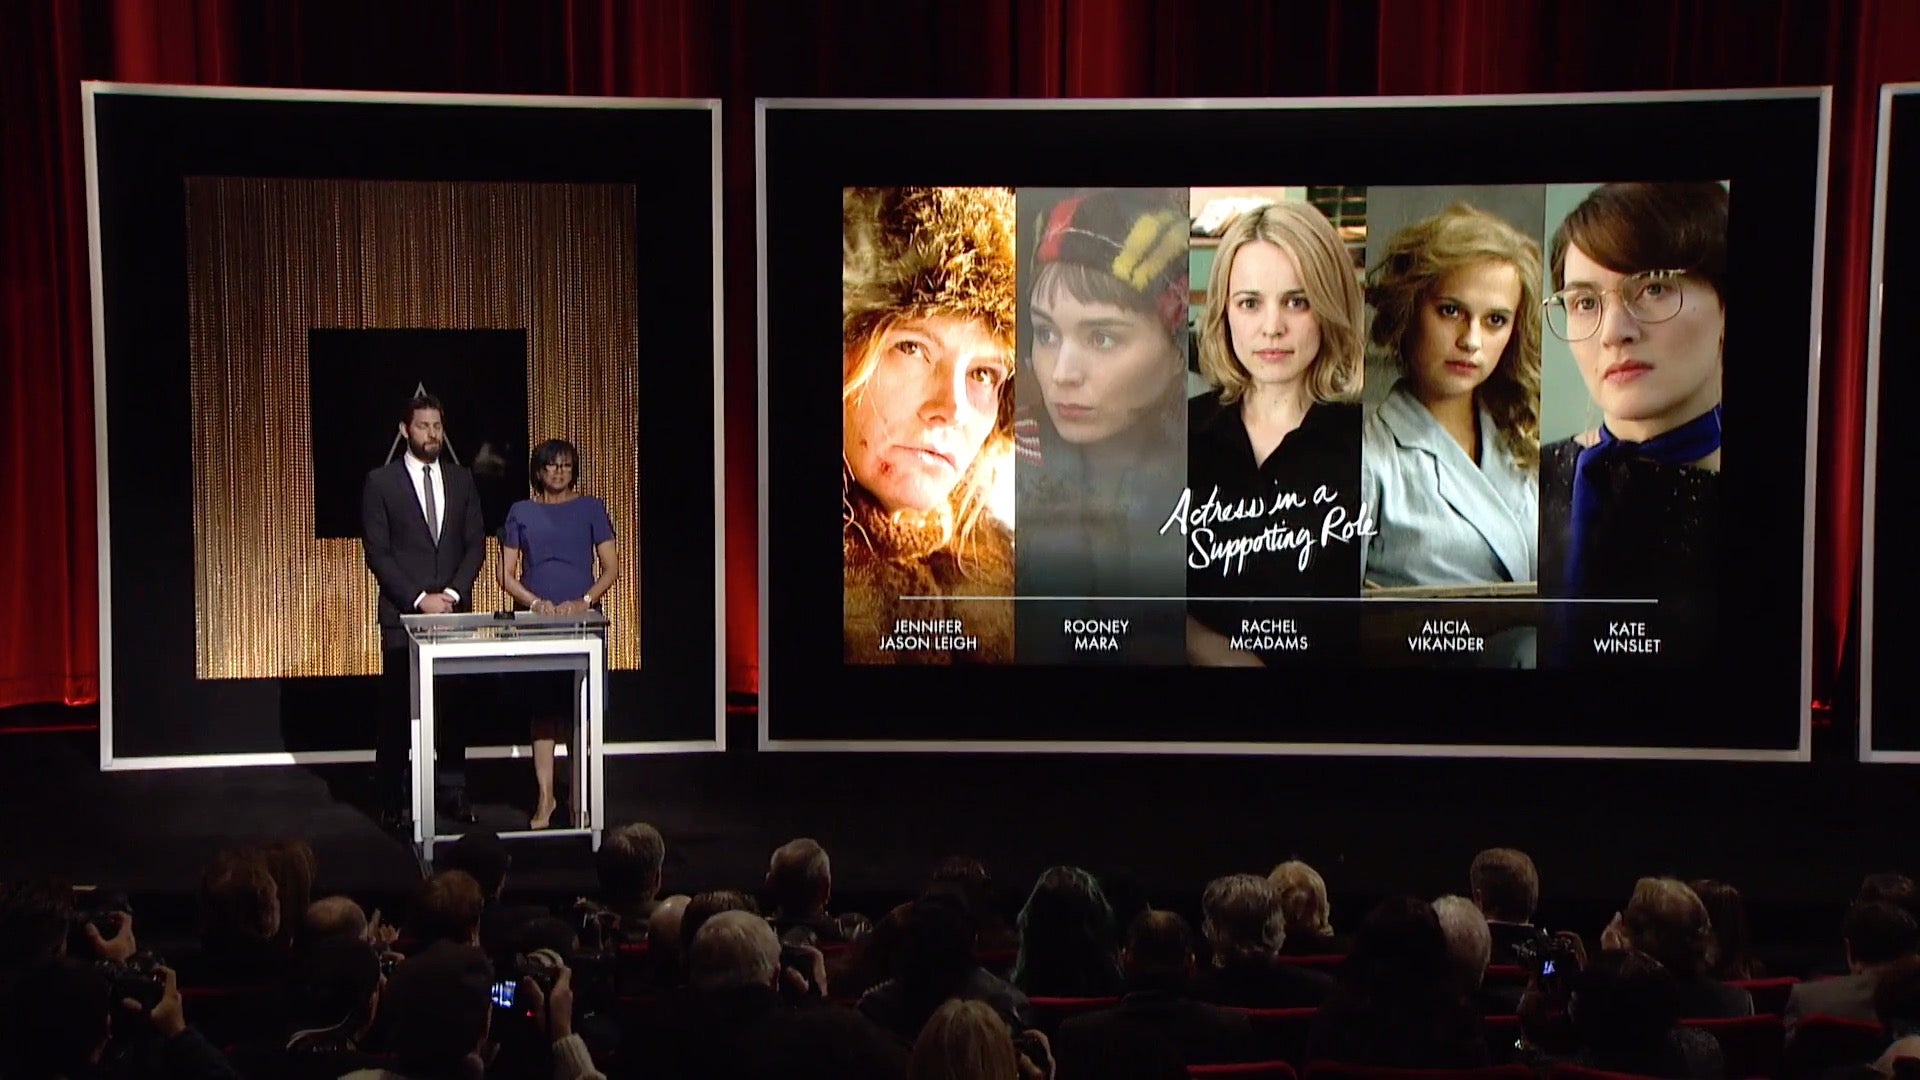 Oscars nominations 2016: Complete list of nominees announced – so will Leonardo ...1920 x 1080